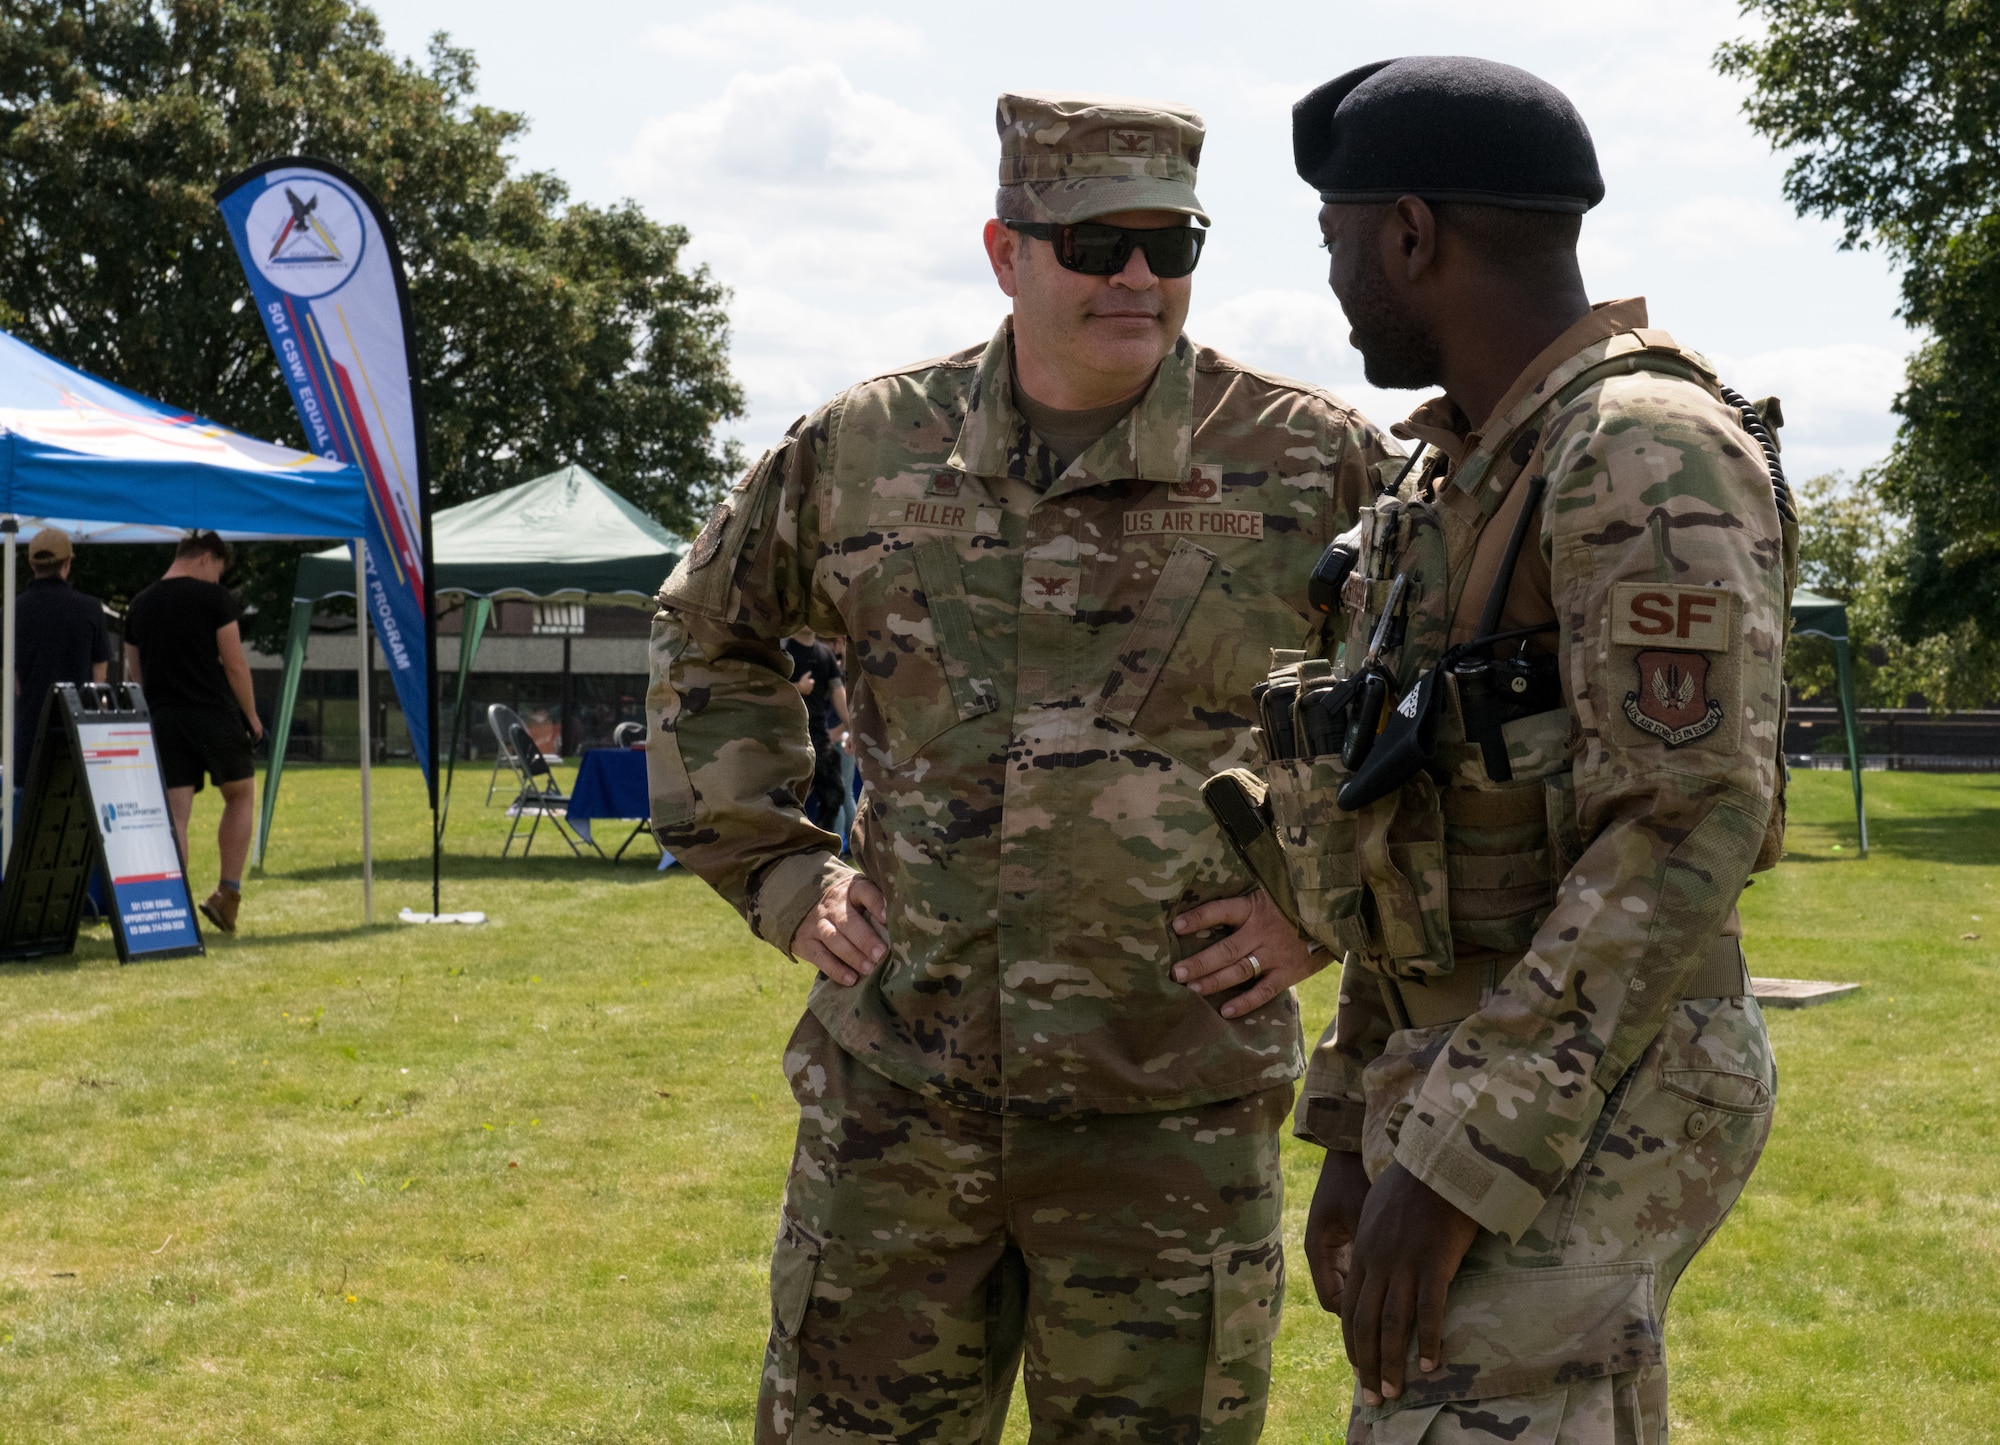 U.S. Air Force Col. Brian Filler, 501st Combat Support Wing commander, chats with Staff Sgt. David Striggles, 423rd Security Forces Squadron patrolman, at the “End of Lockdown” block party at Royal Air Force Alconbury Alconbury, England, Aug. 11, 2021. The event was open to military members, spouses, and civilians to educate them on the various ways helping agencies supports them. (U.S. Air Force photo by Senior Airman Gabrielle Winn)